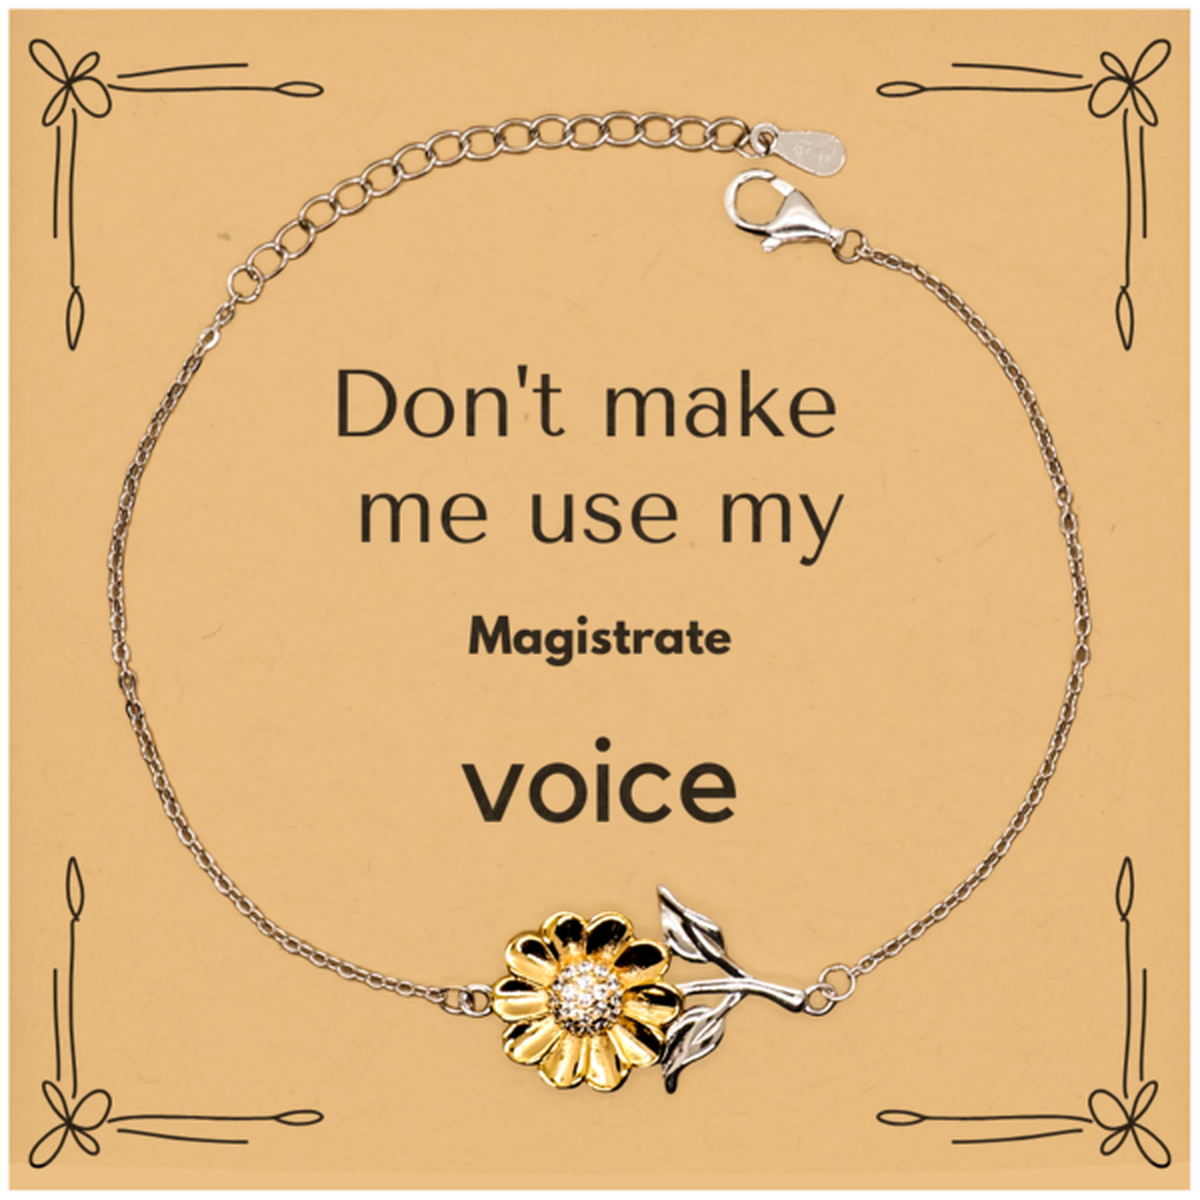 Don't make me use my Magistrate voice, Sarcasm Magistrate Card Gifts, Christmas Magistrate Sunflower Bracelet Birthday Unique Gifts For Magistrate Coworkers, Men, Women, Colleague, Friends